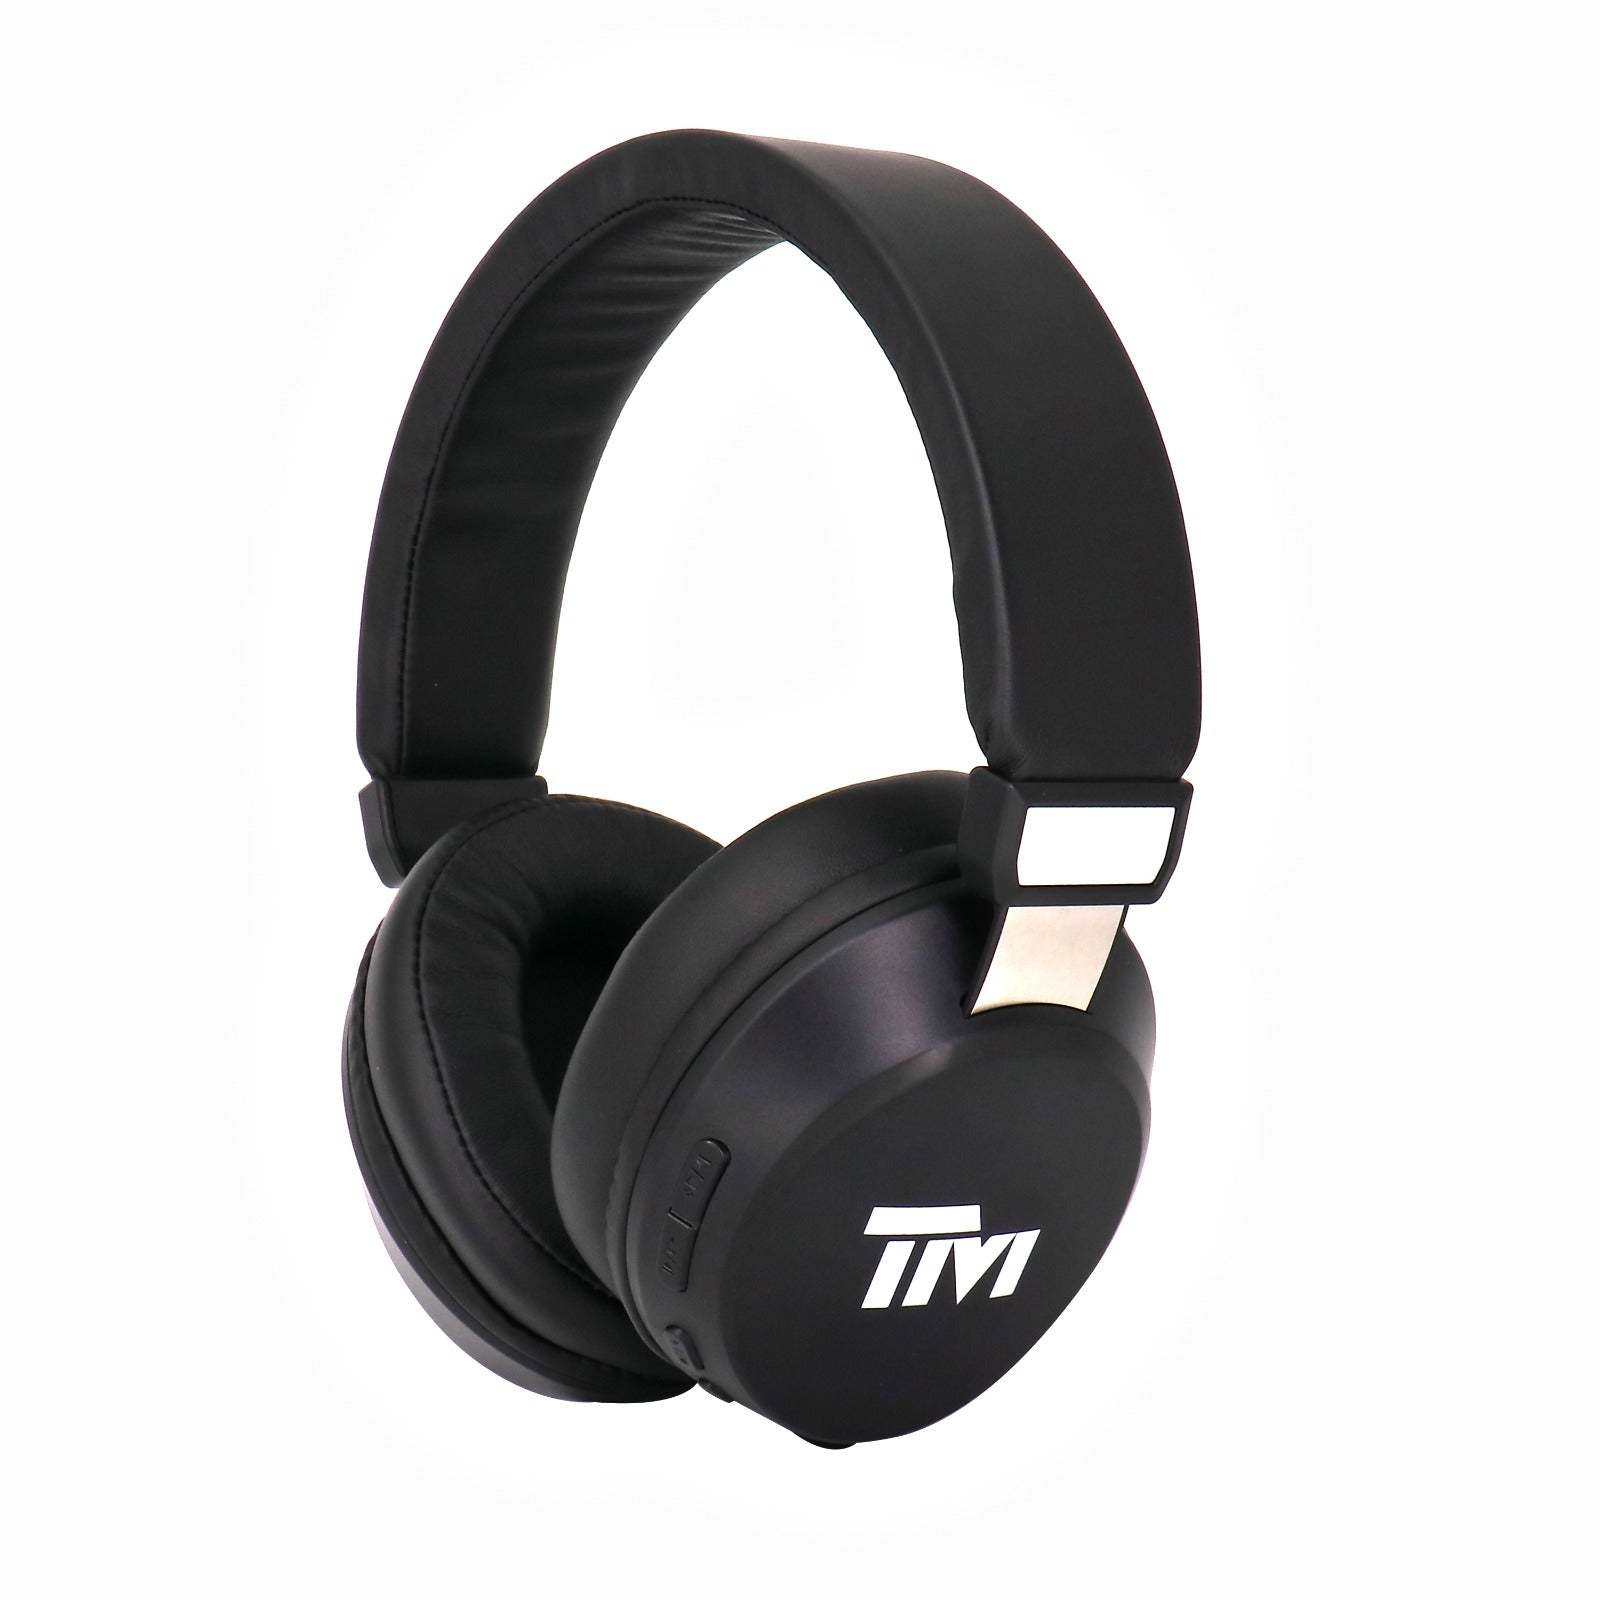 Best wireless gaming headset Twisted Minds G2